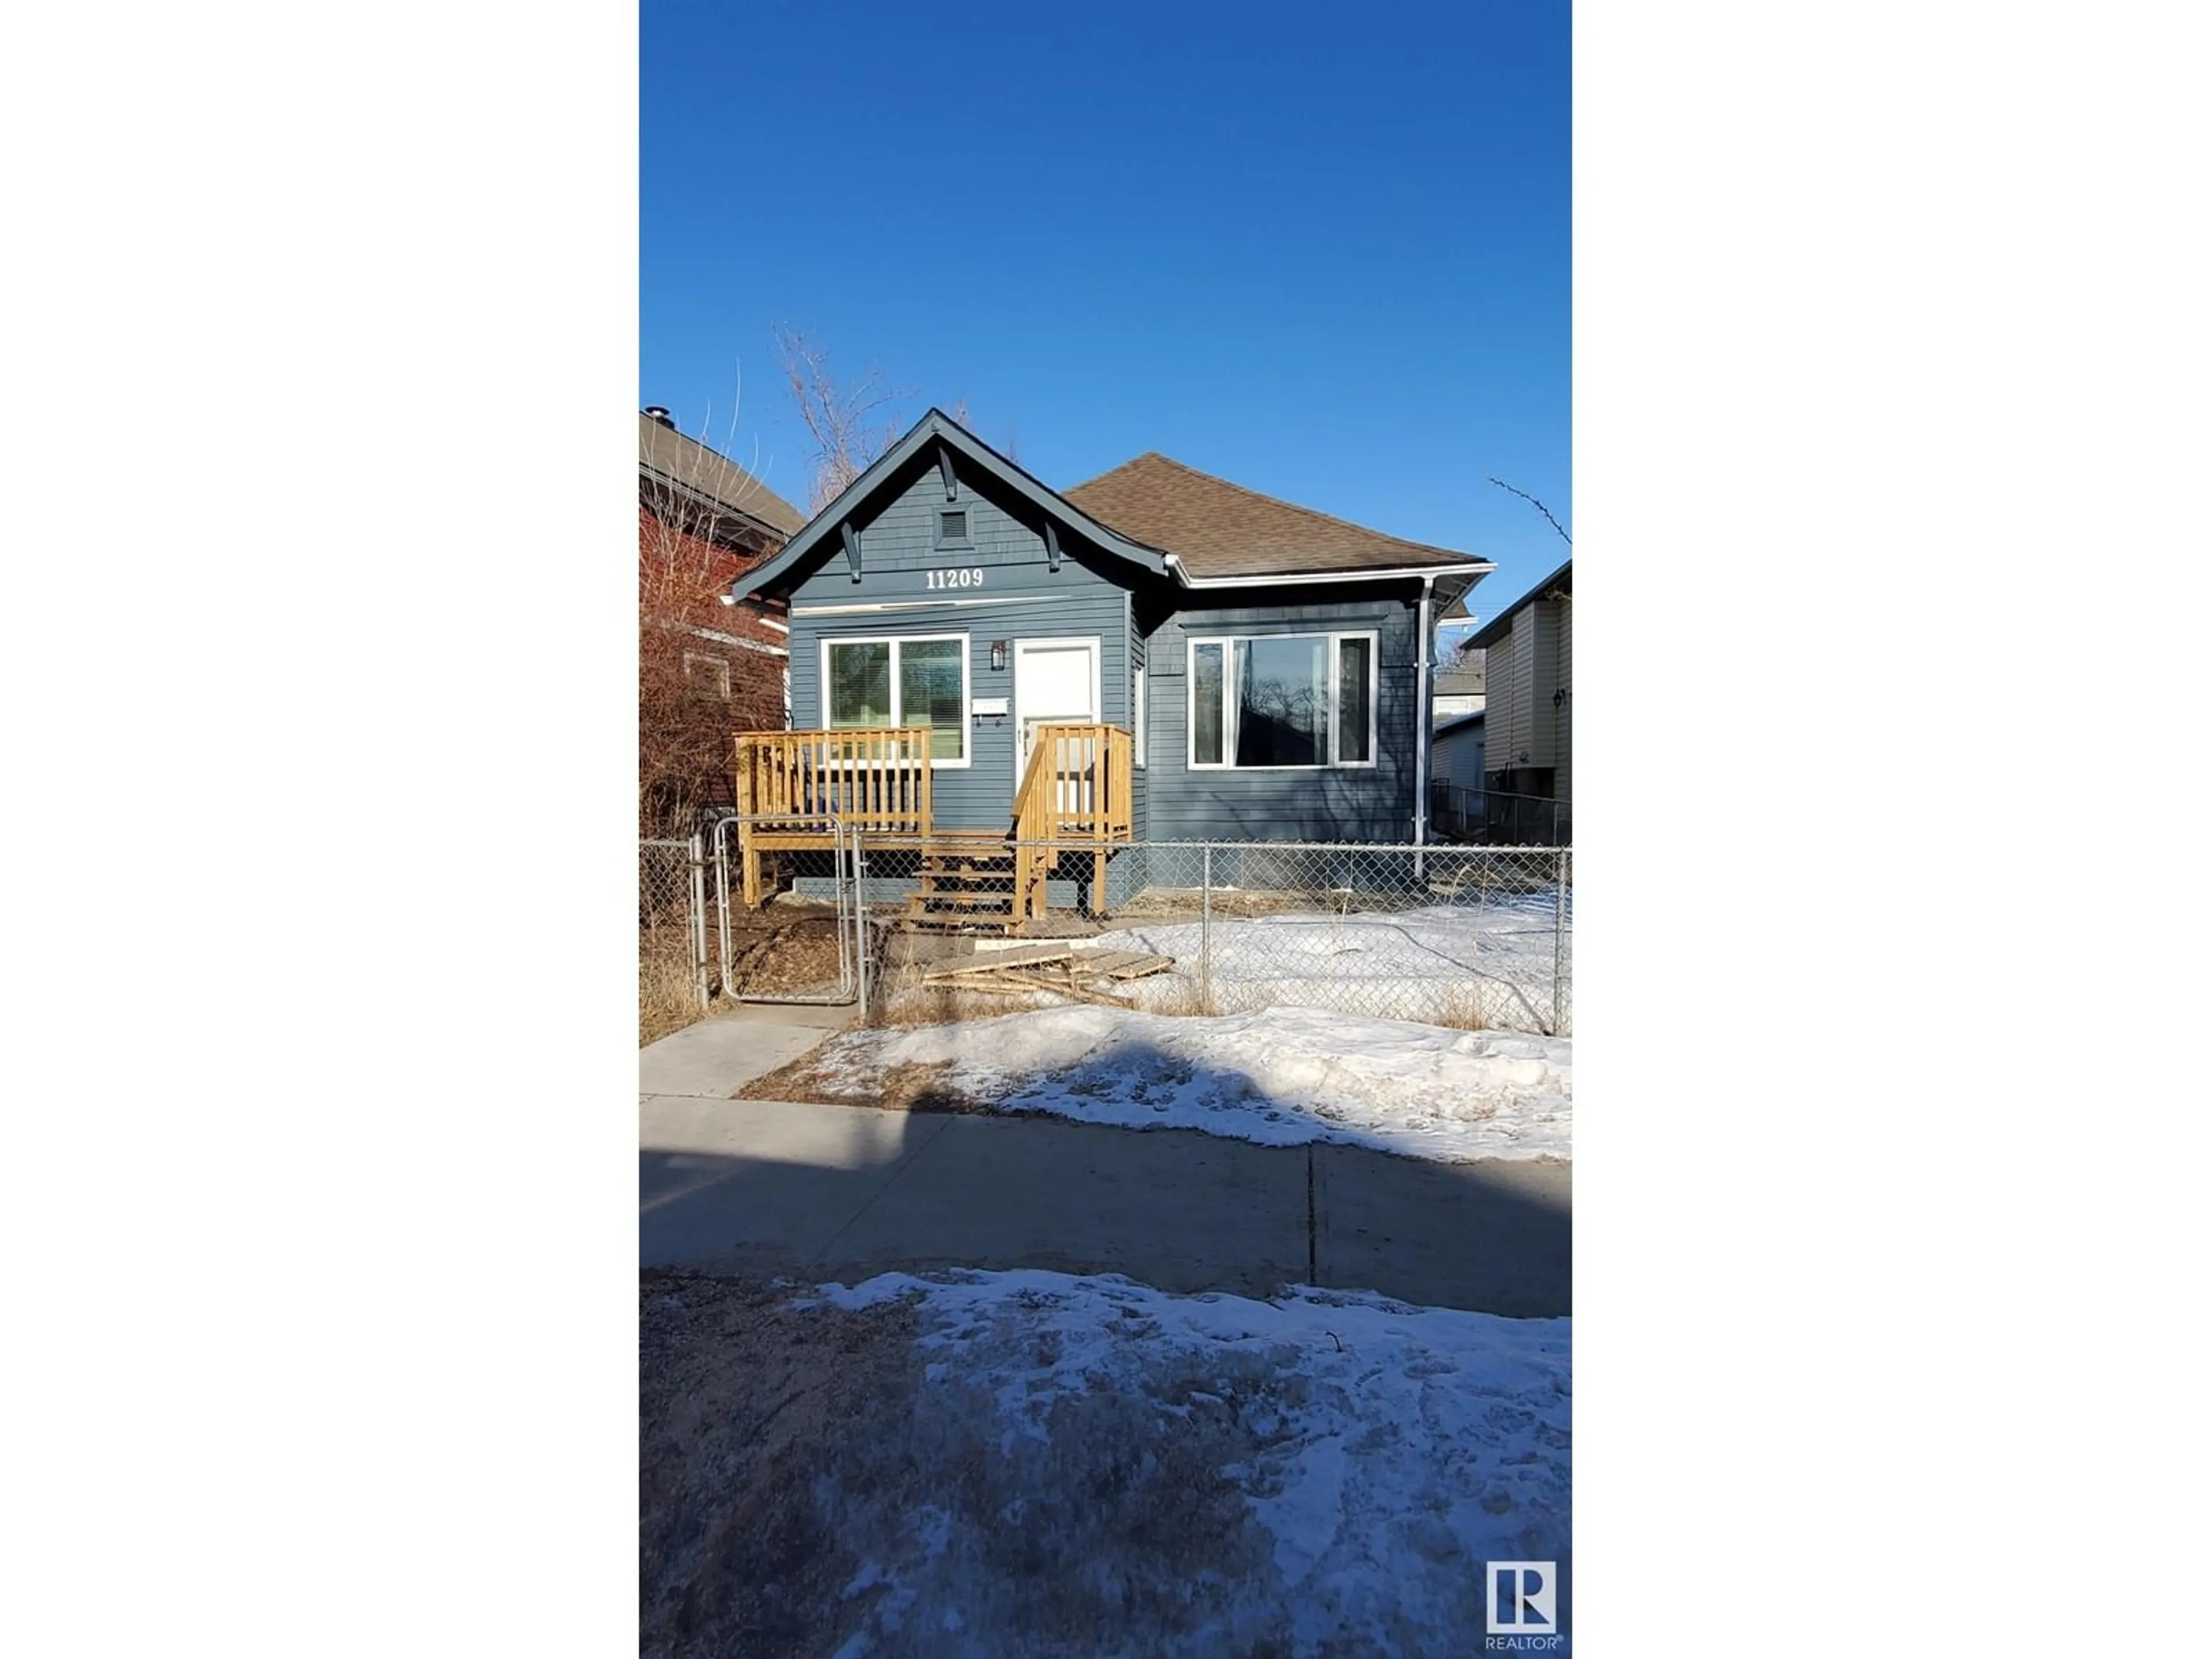 Frontside or backside of a home for 11209 96 ST NW, Edmonton Alberta T5G1G1